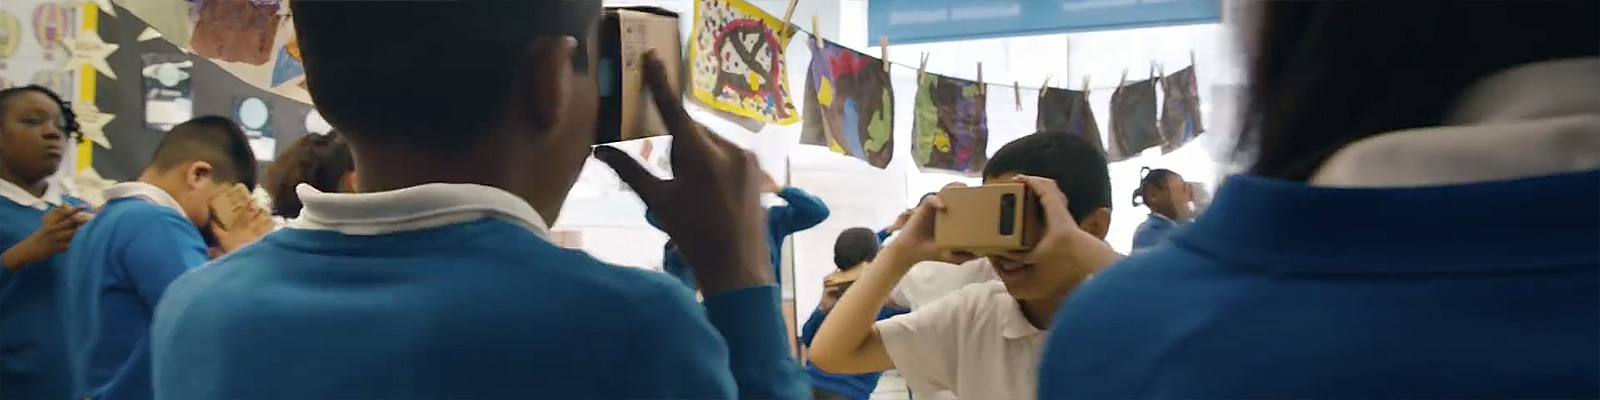 Google Expeditions